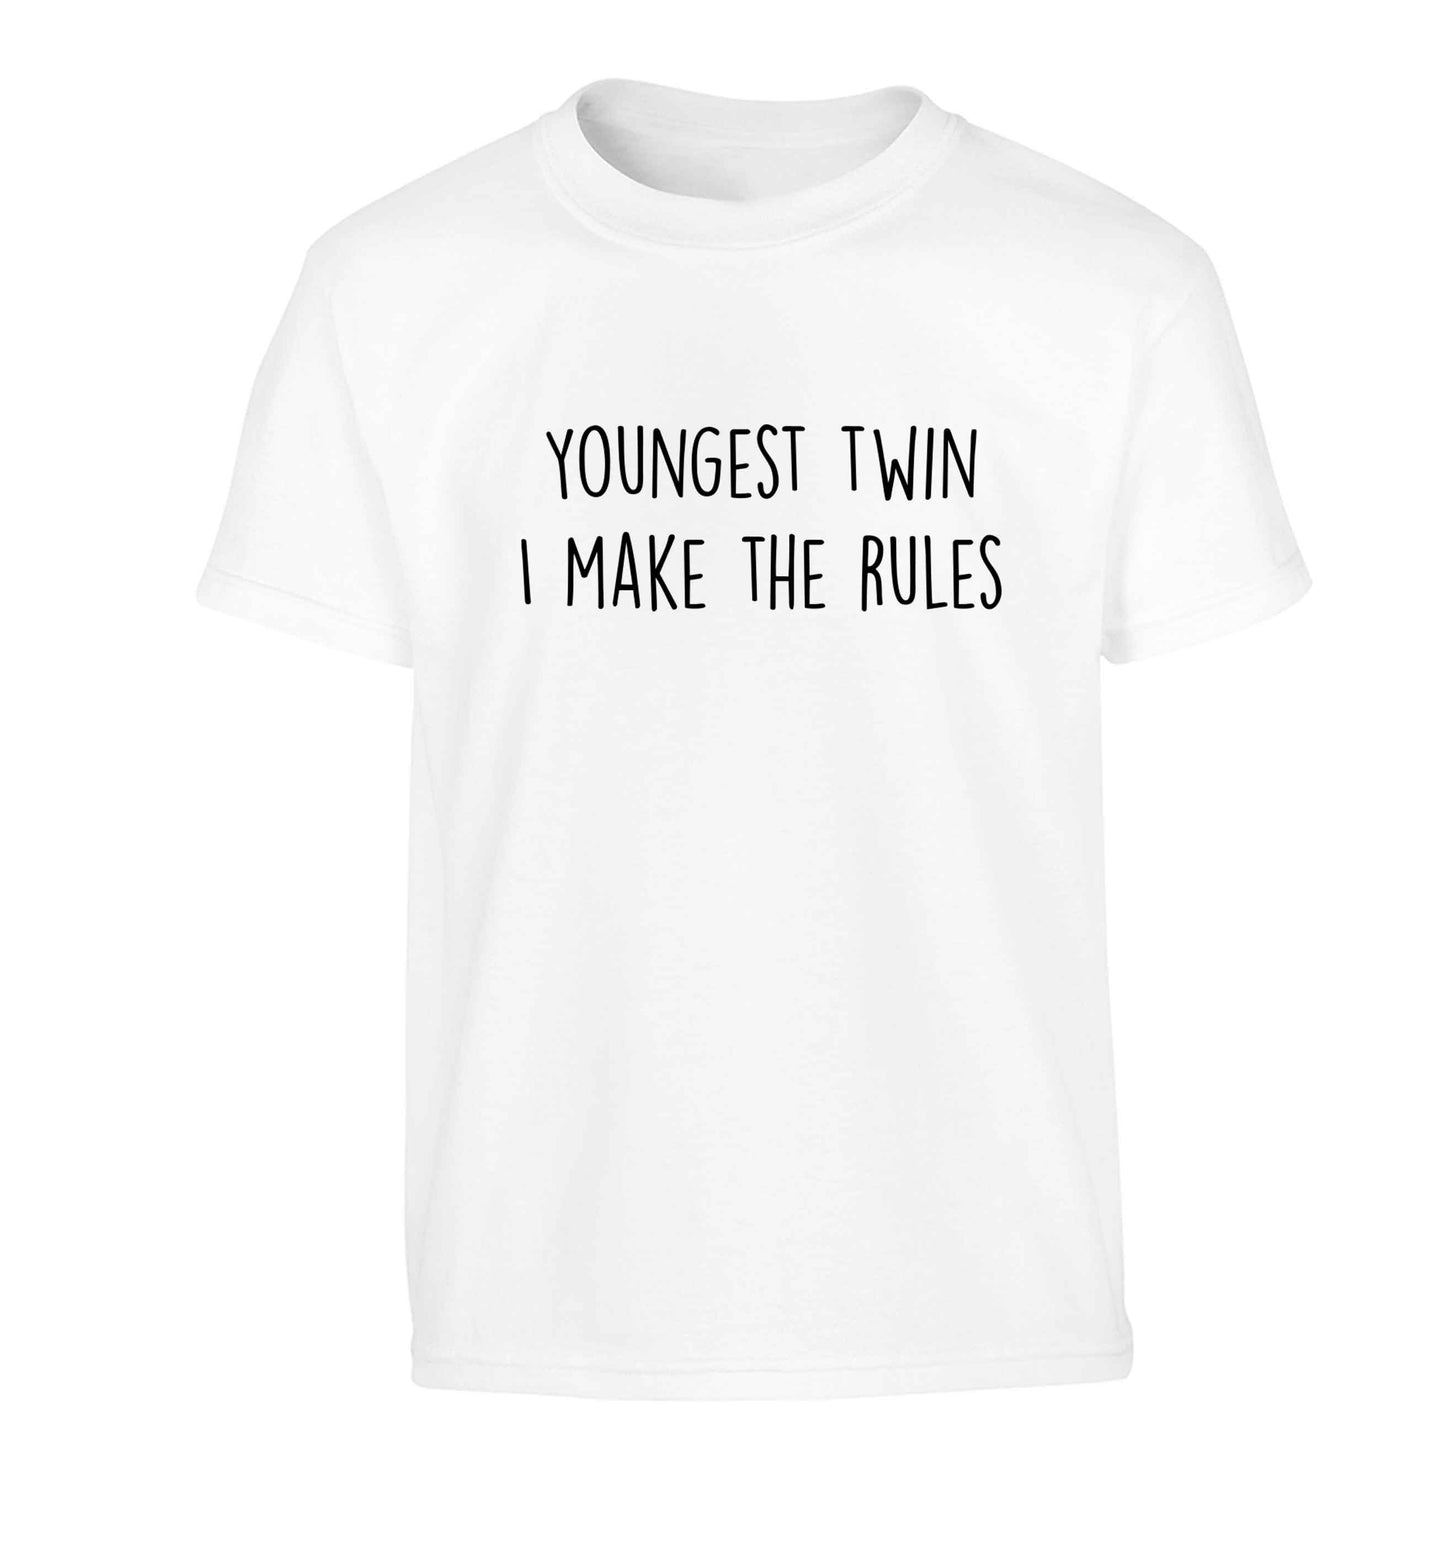 Youngest twin I make the rules Children's white Tshirt 12-13 Years